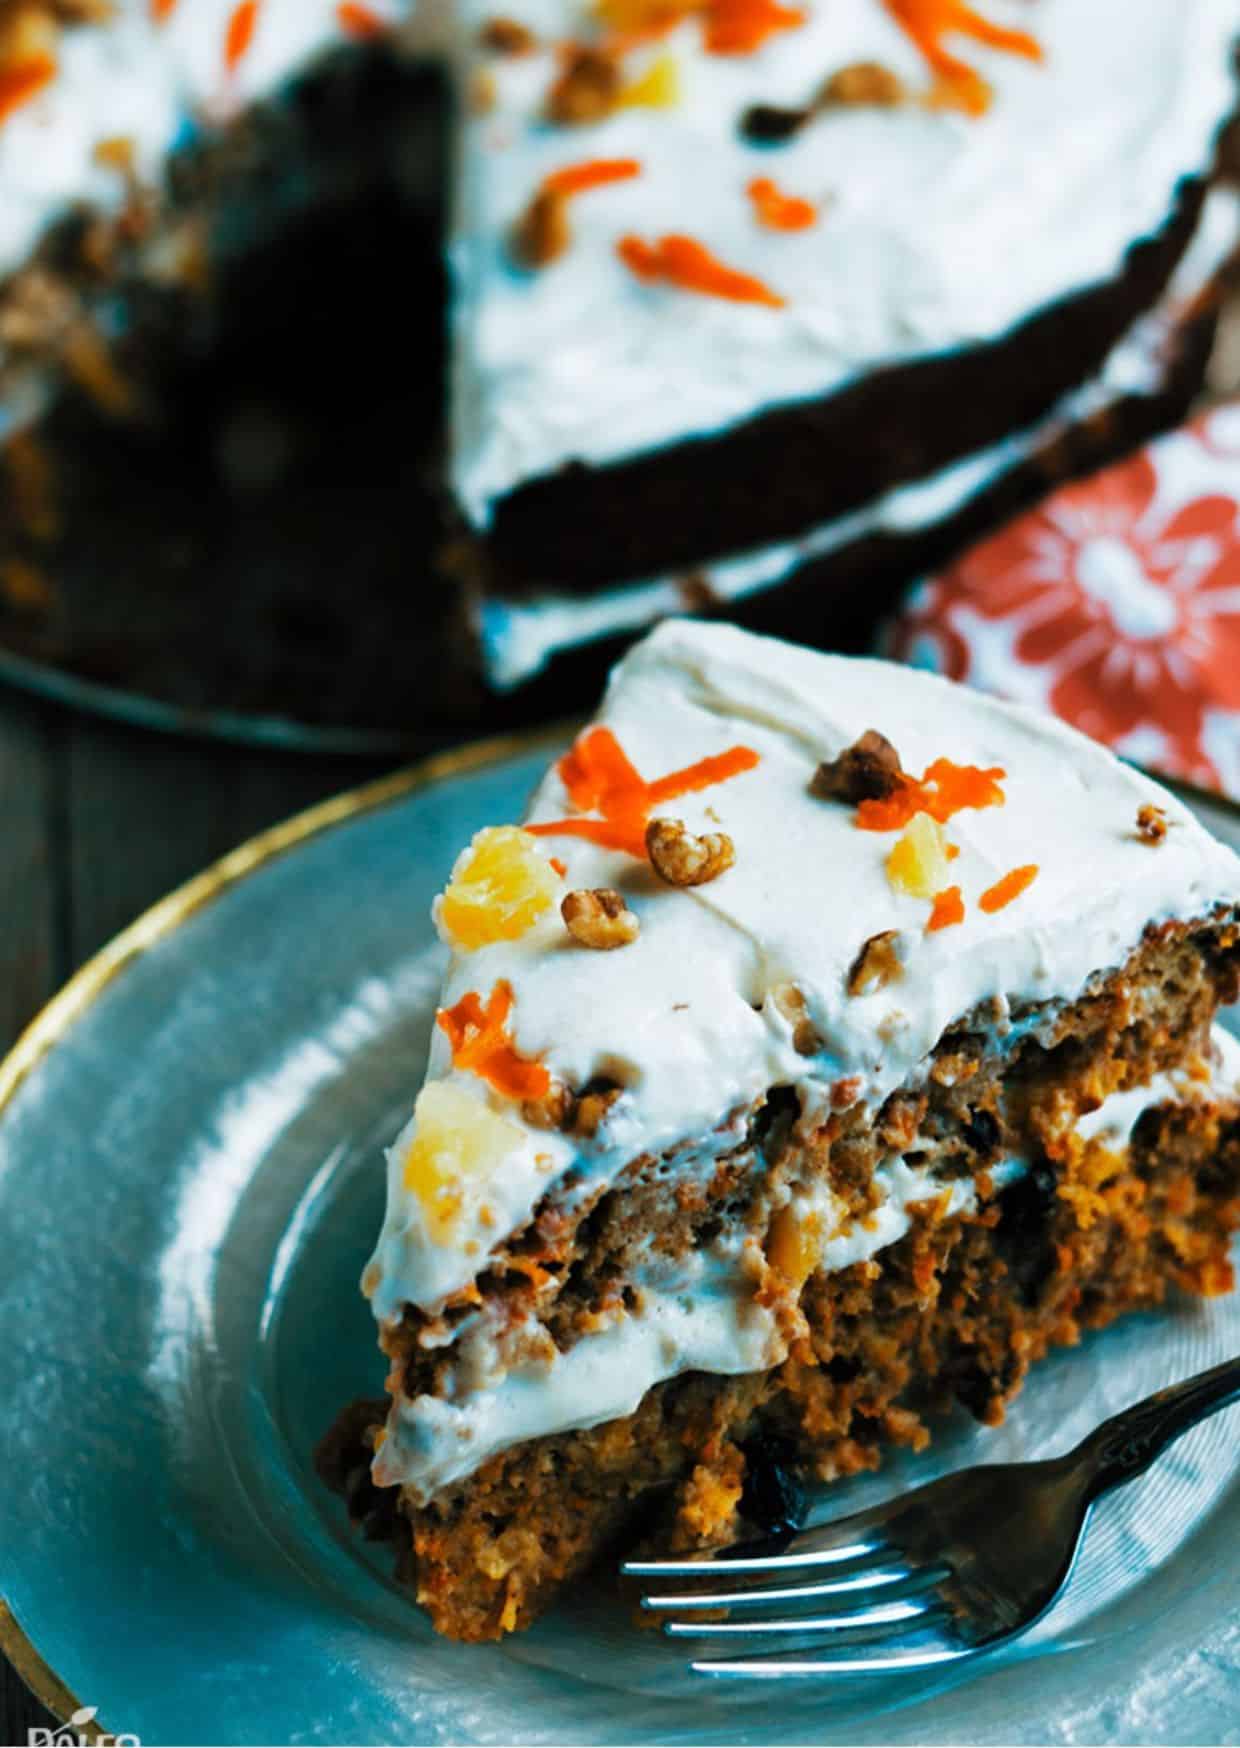 Layered Carrot Cake from Scratch - Best EVER!! - Kitchen Divas